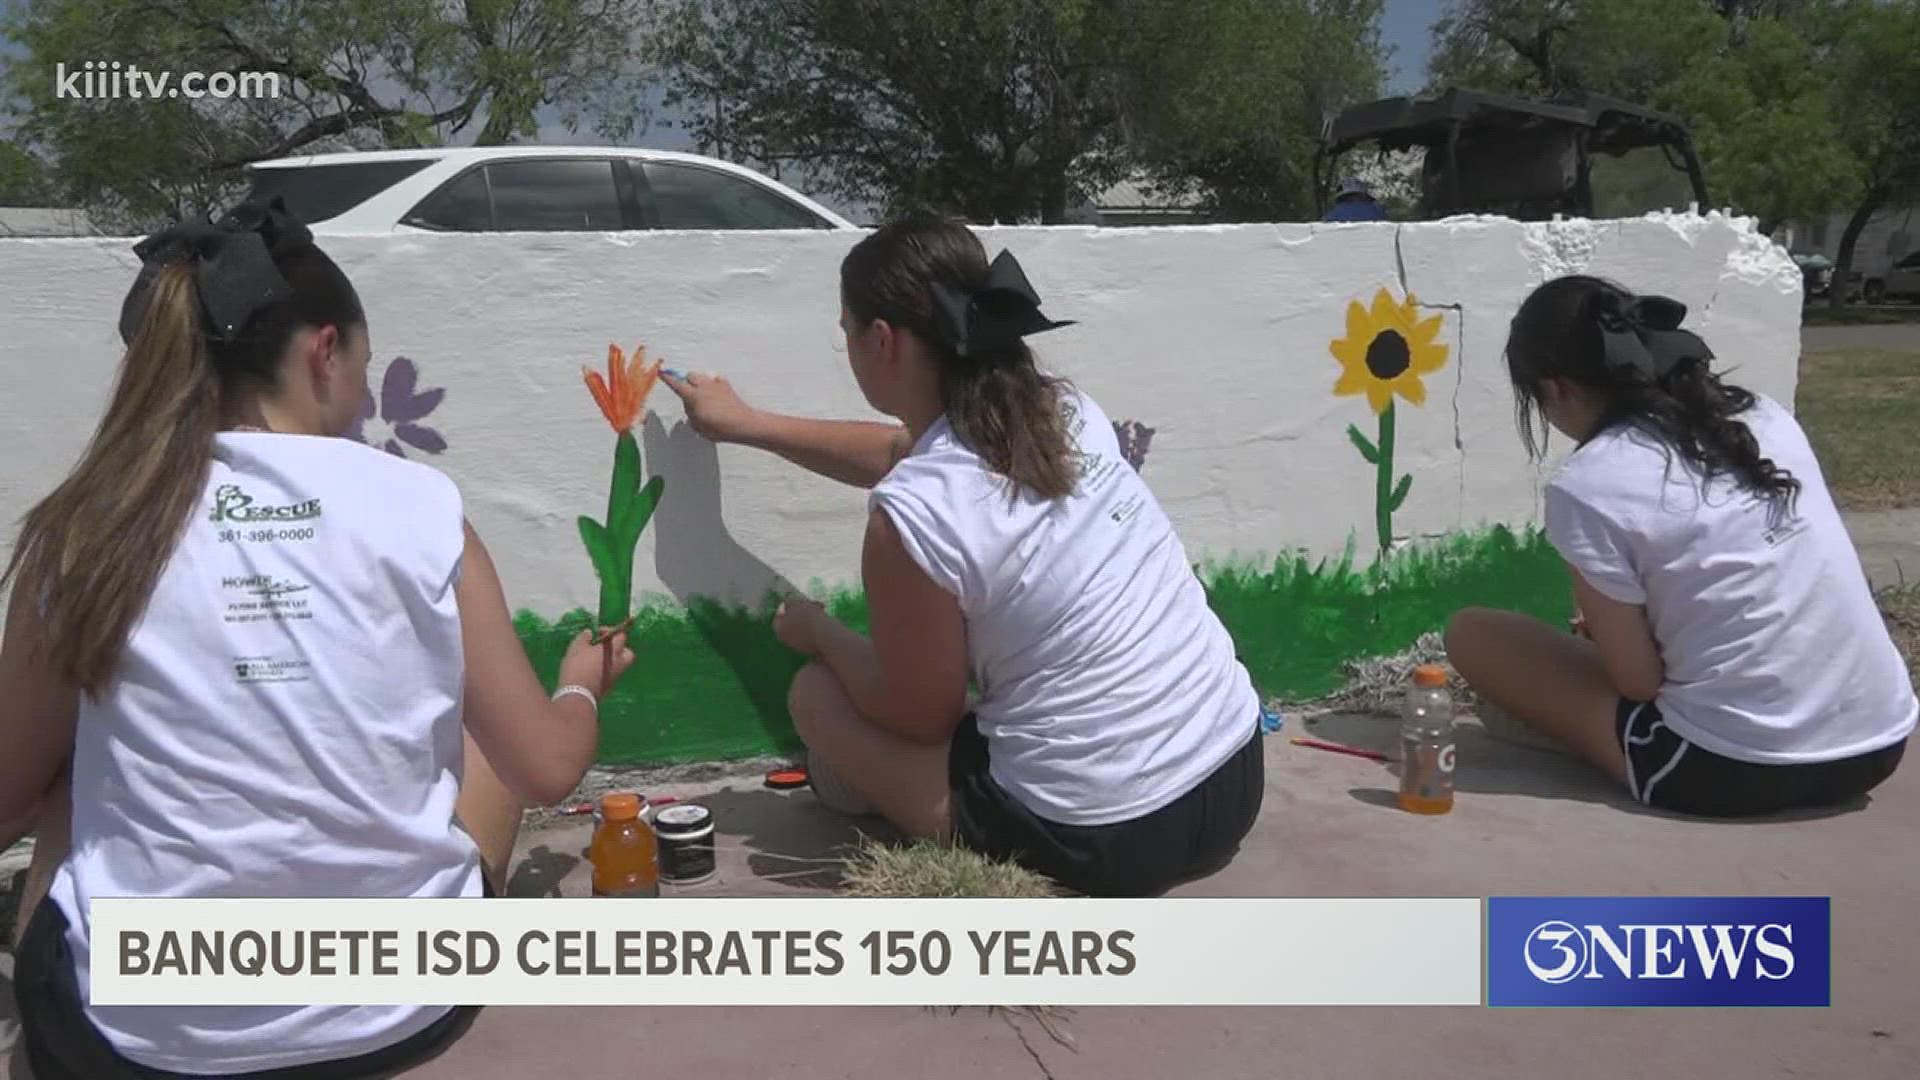 The beautification project was not only to celebrate 150 years, but to pave the way for future Bulldogs.